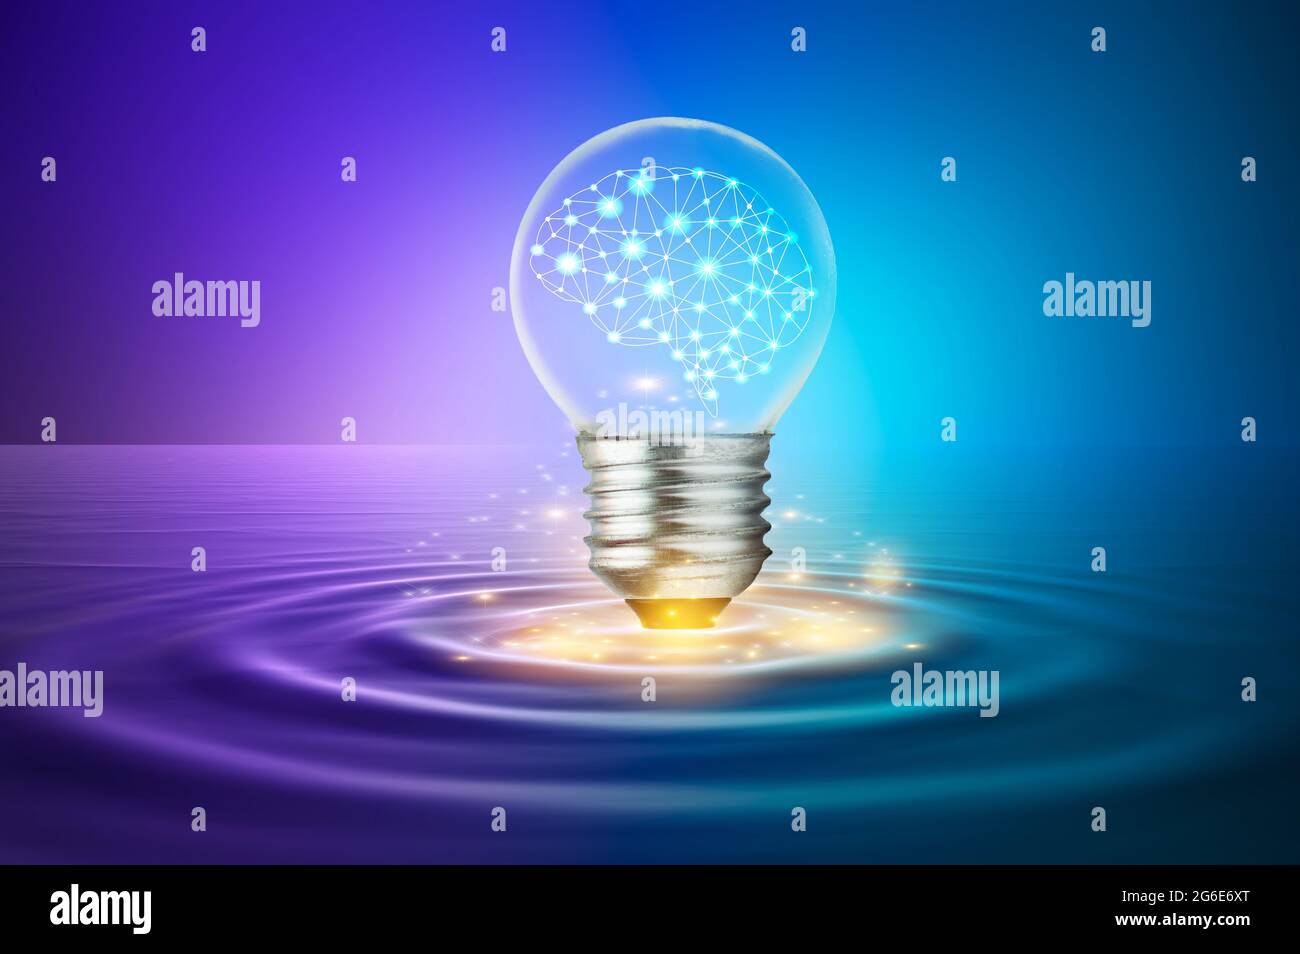 A light bulb with a brain inside is floating above the surface.concepts using imagination and ideas Stock Photo